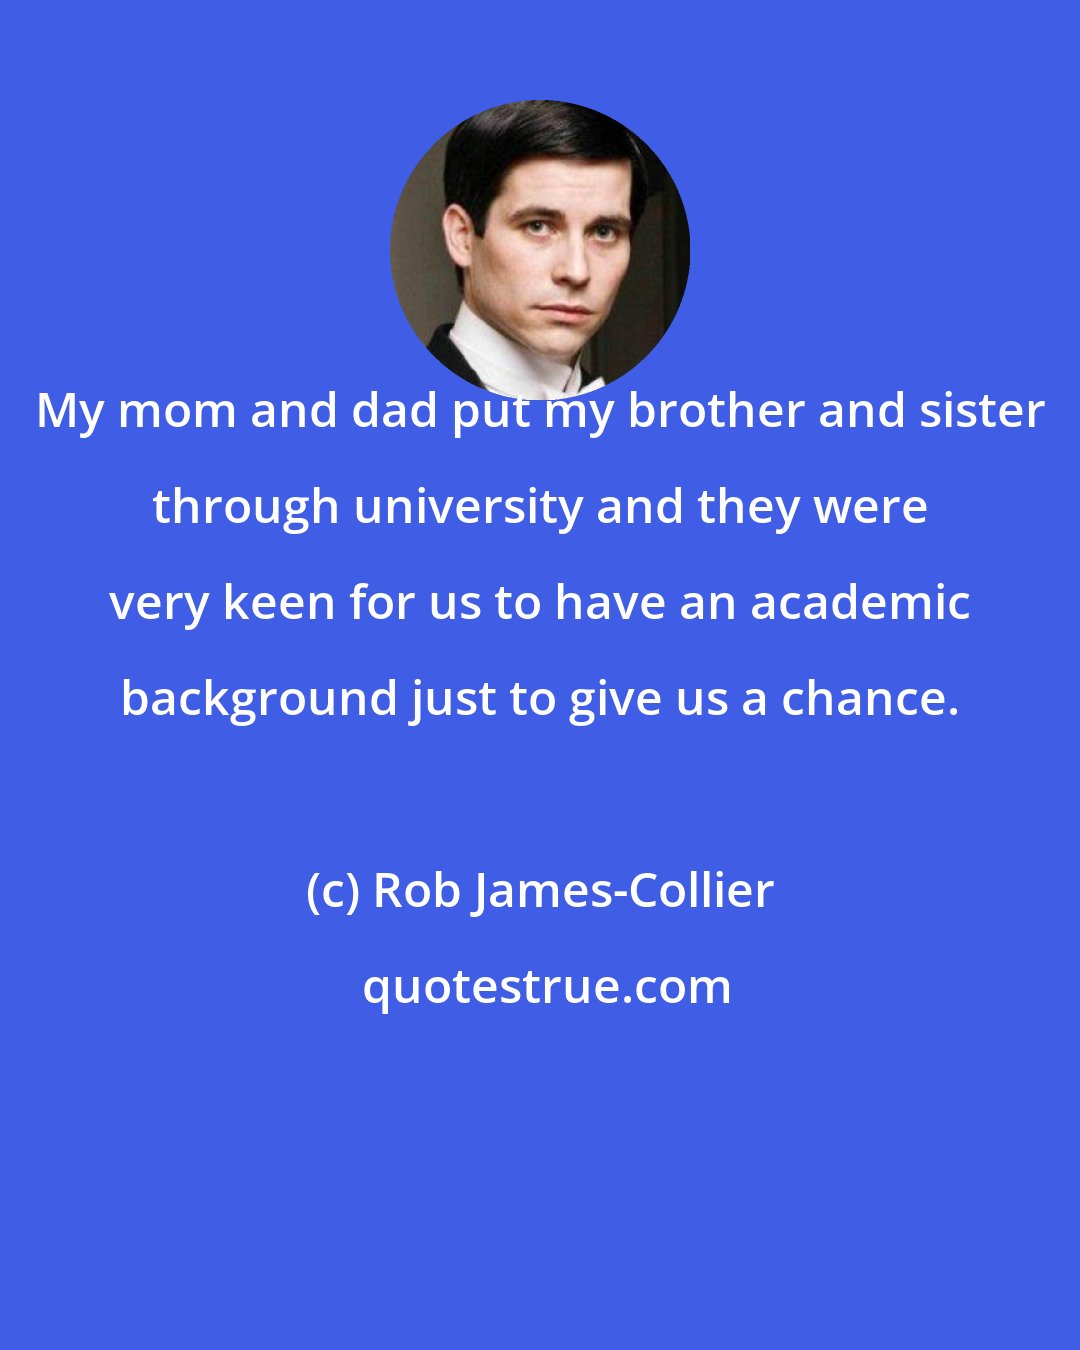 Rob James-Collier: My mom and dad put my brother and sister through university and they were very keen for us to have an academic background just to give us a chance.